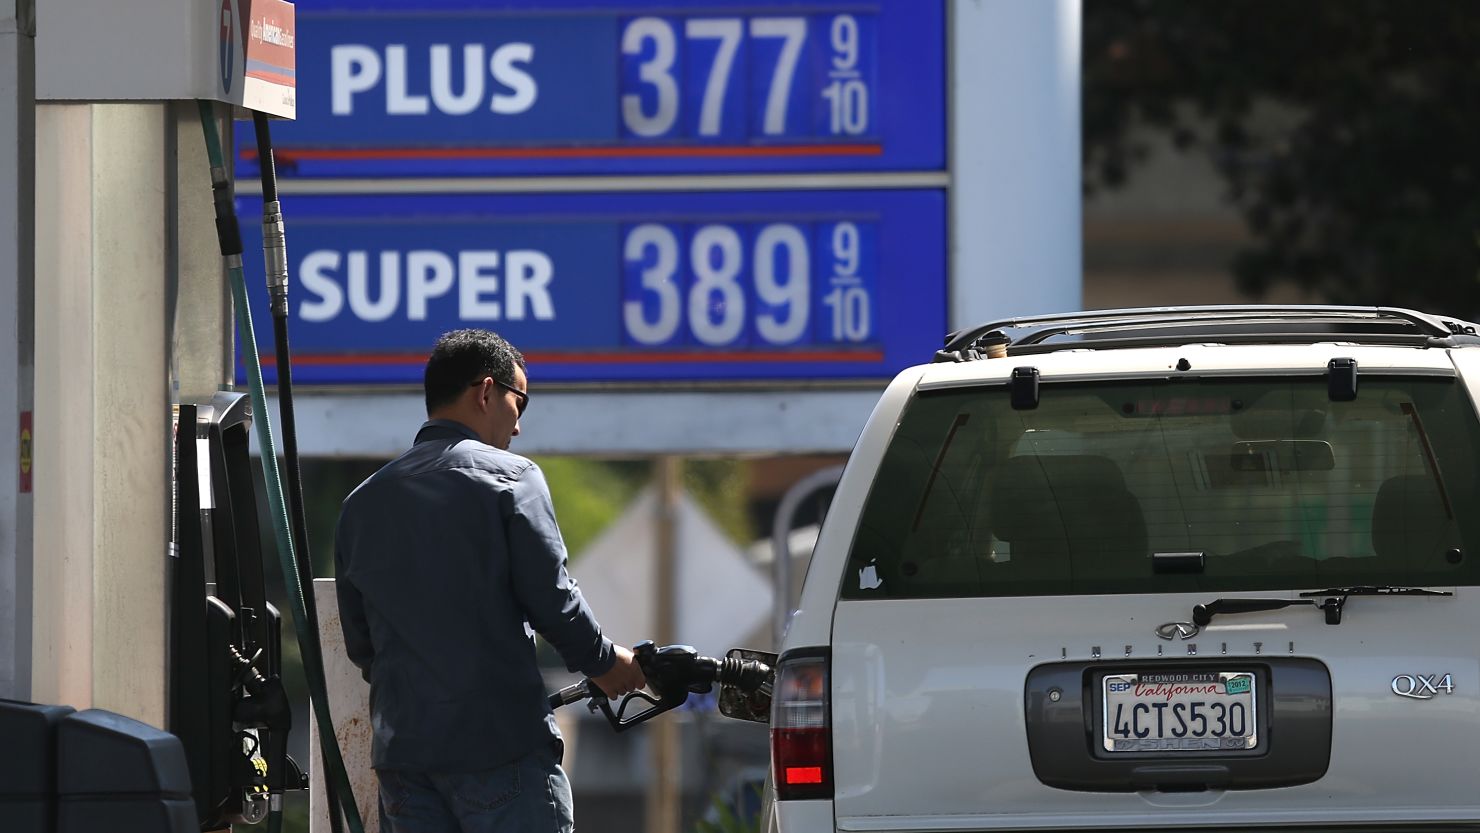  The national average price of gasoline has dropped to a fraction of a penny under $3.25 a gallon,